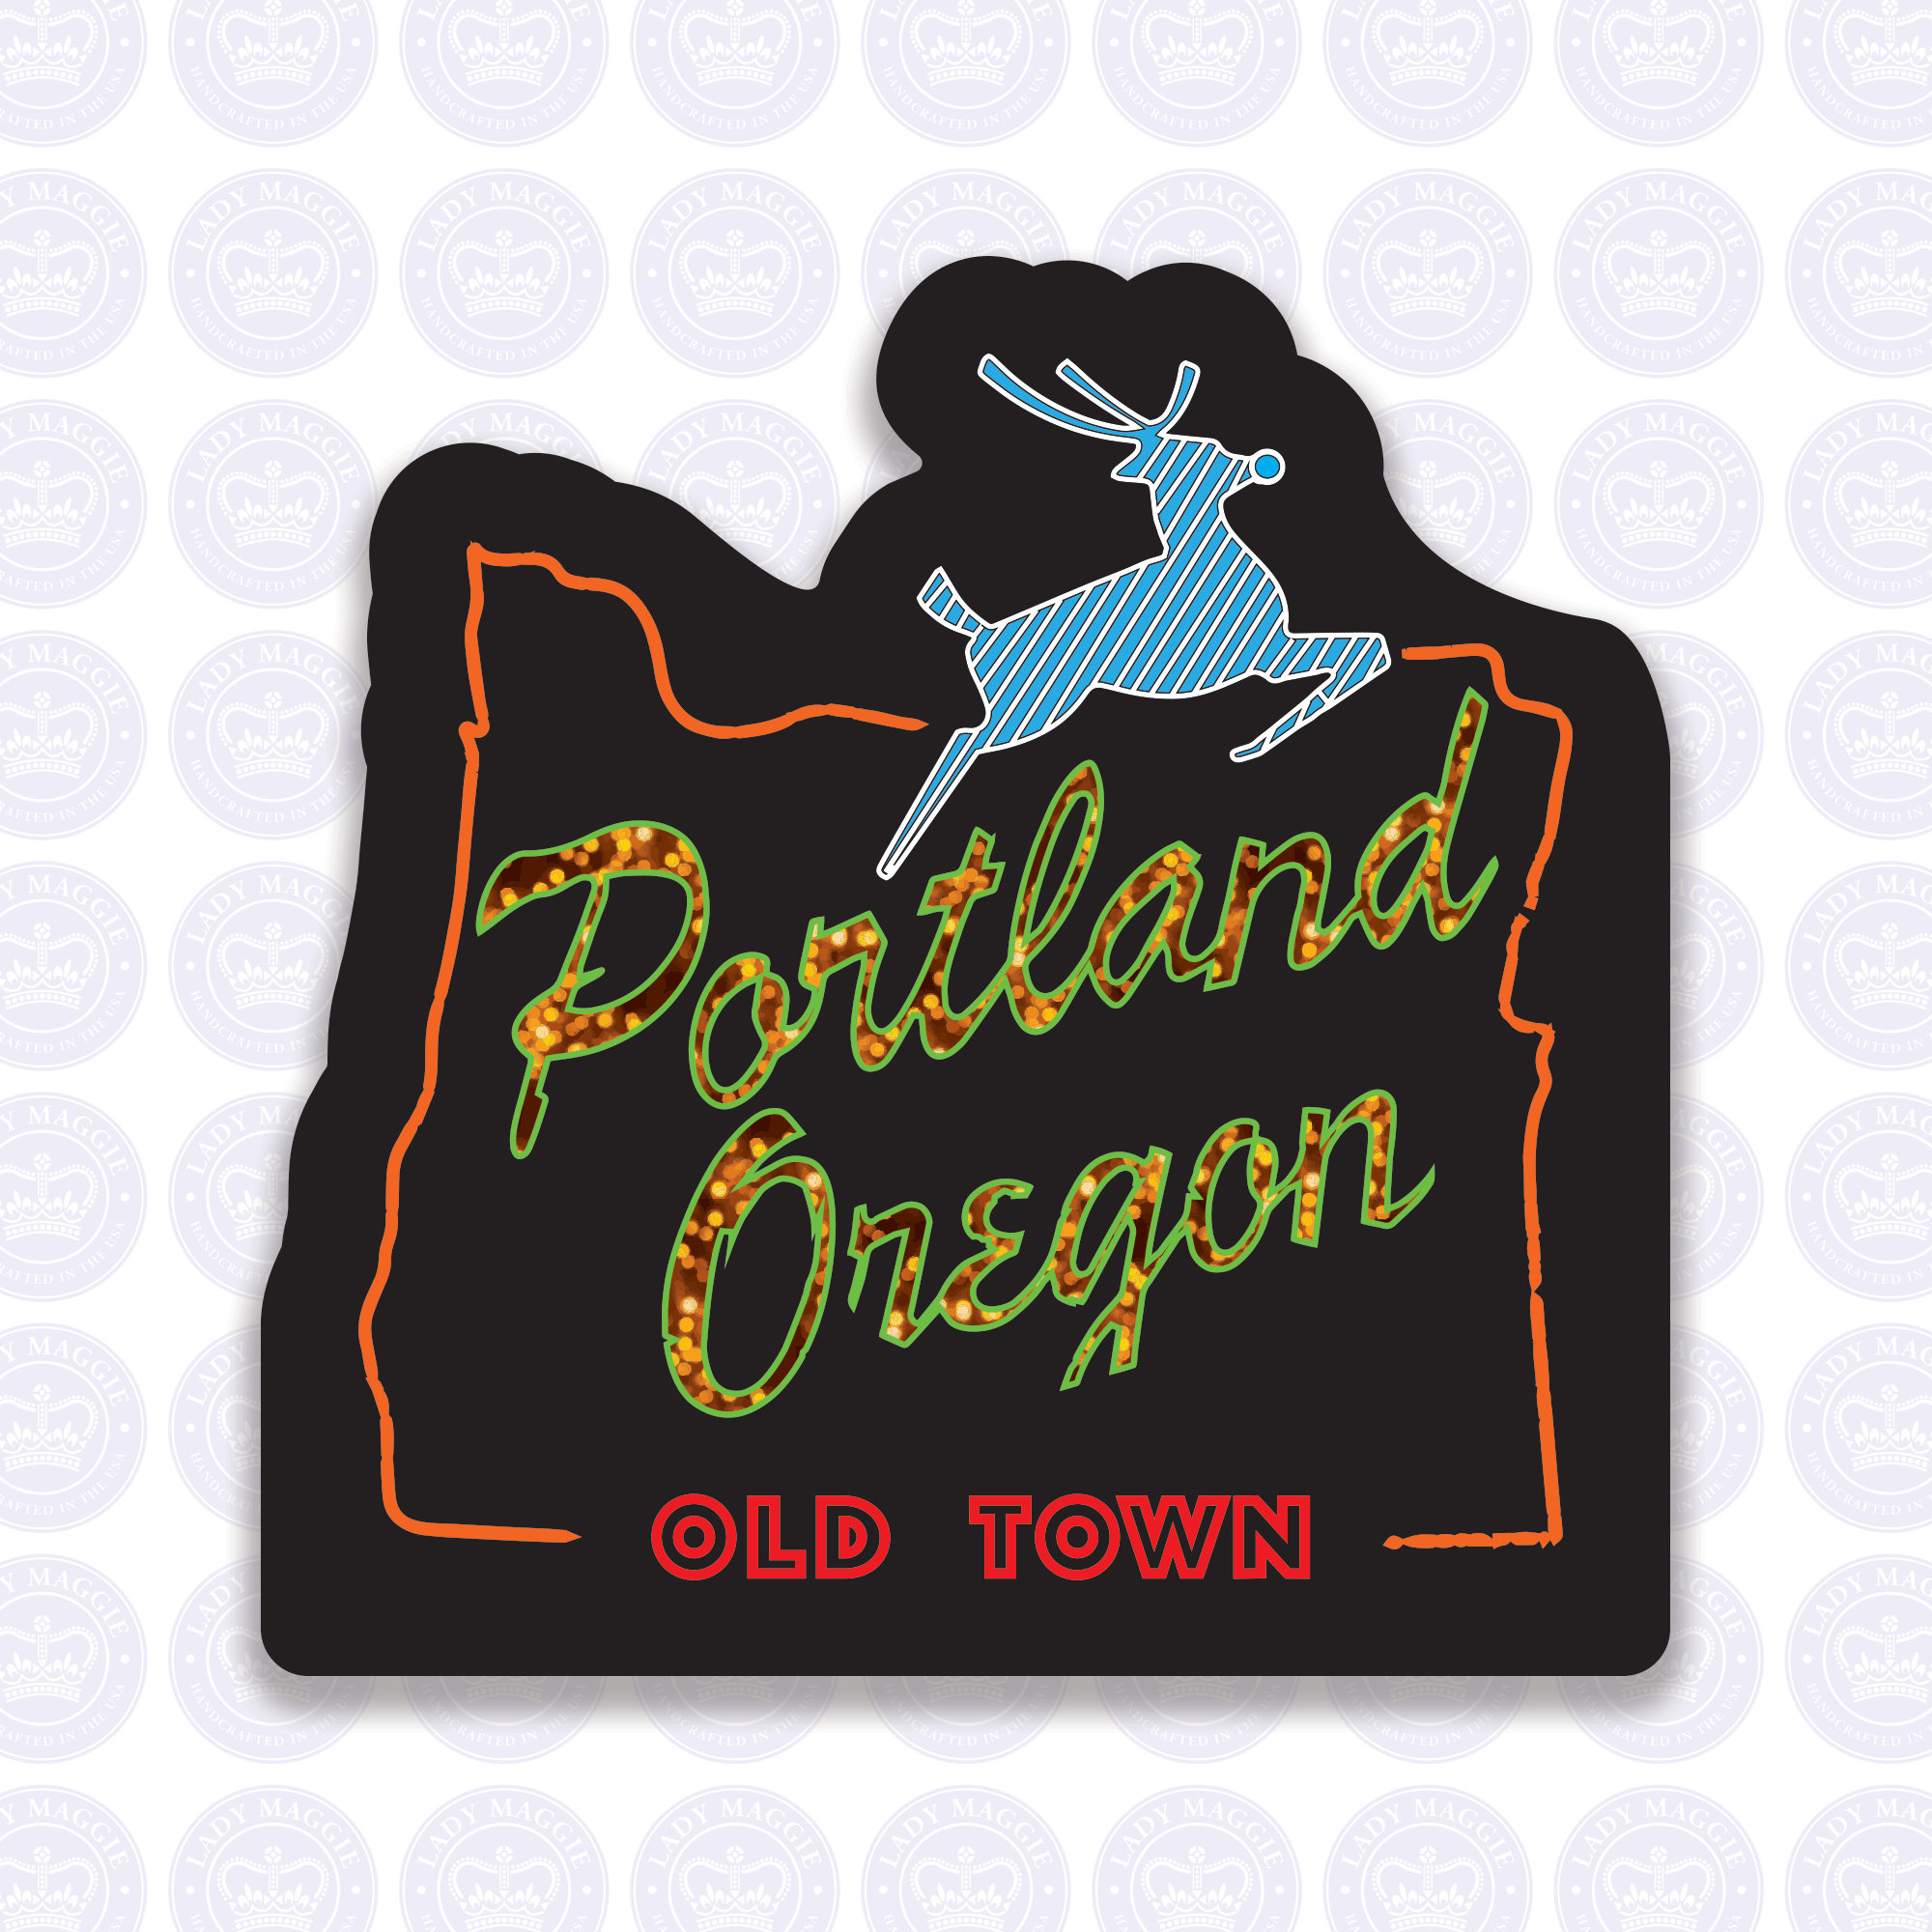 Portland Oregon Old Town Decal - Old Town Portland OR Bumper Sticker - Oregon Decal - Portland OR Decal